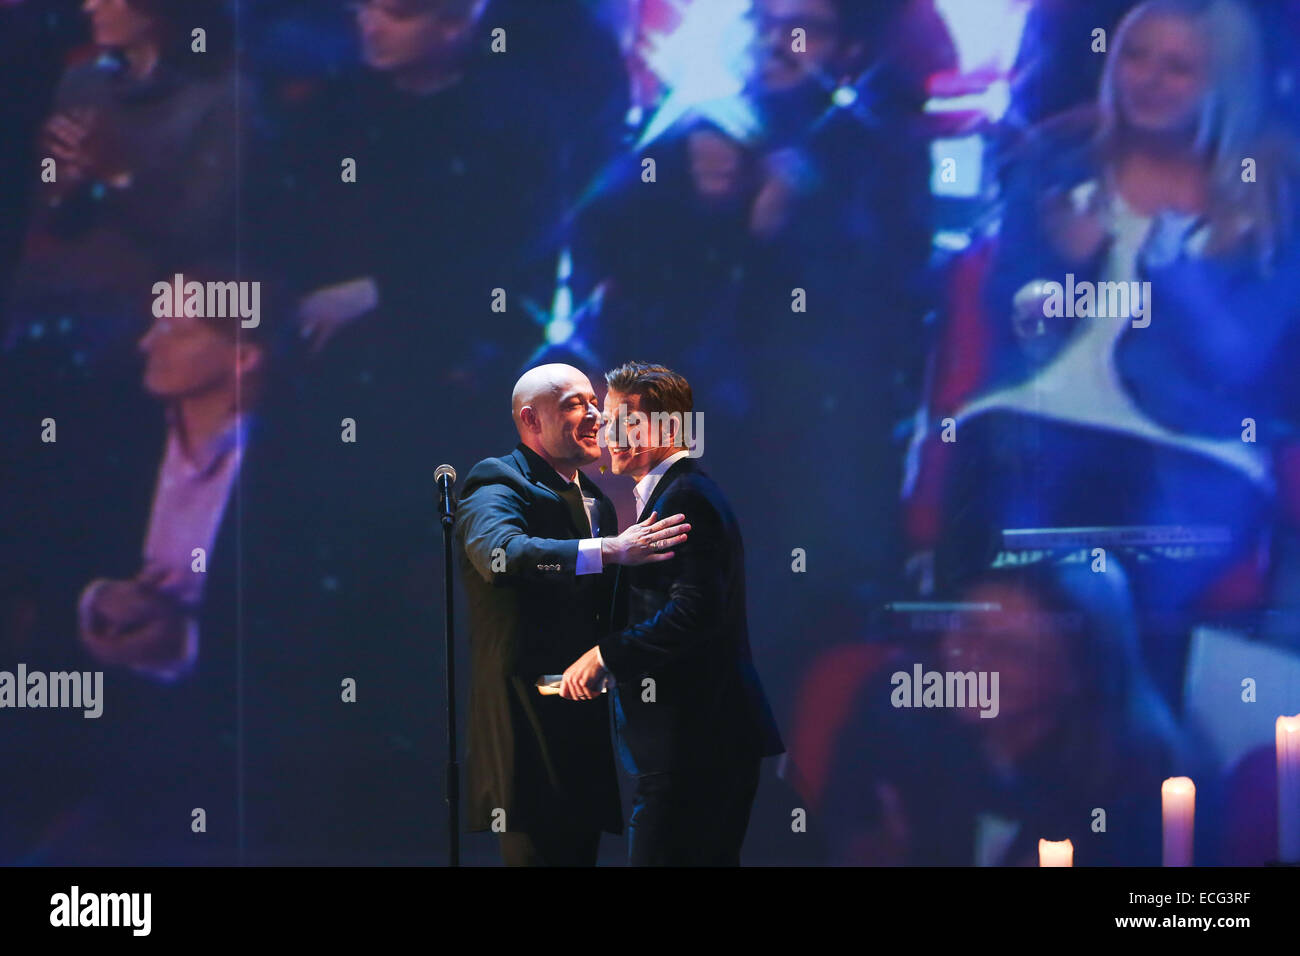 Nuremberg, Germany. 13th Dec, 2014. Presenter Markus Lanz (R) embraces the singer of the band 'Unheilig', 'Der Graf', on stage during the final edition of the German television game show 'Wetten, dass.?' (Wanna bet.?), aired on public broadaster ZDF, in Nuremberg, Germany, 13 December 2014. Germany's longtime television game show is now off air after 34 years. Photo: David Ebener/dpa/Alamy Live News Stock Photo